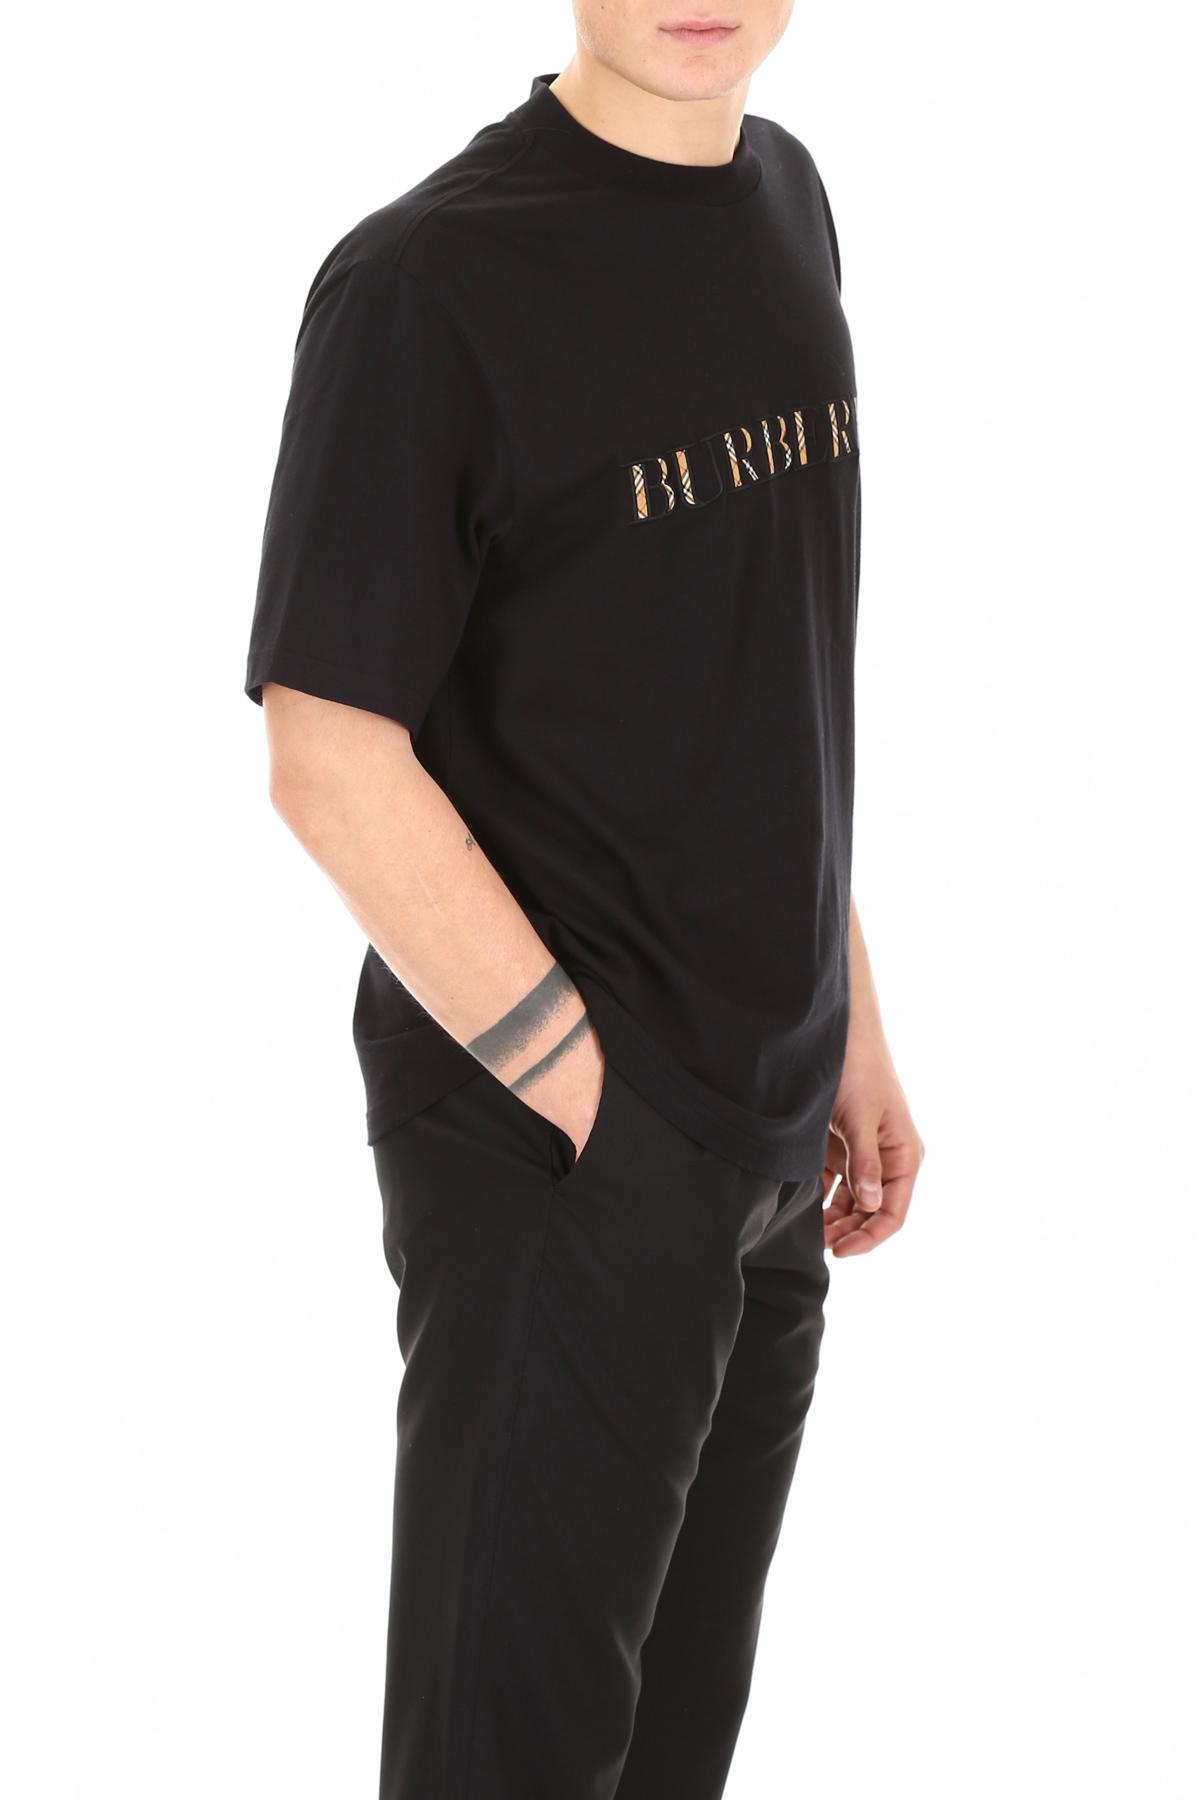 Burberry Check Logo Cotton T-shirt in Black for Men | Lyst